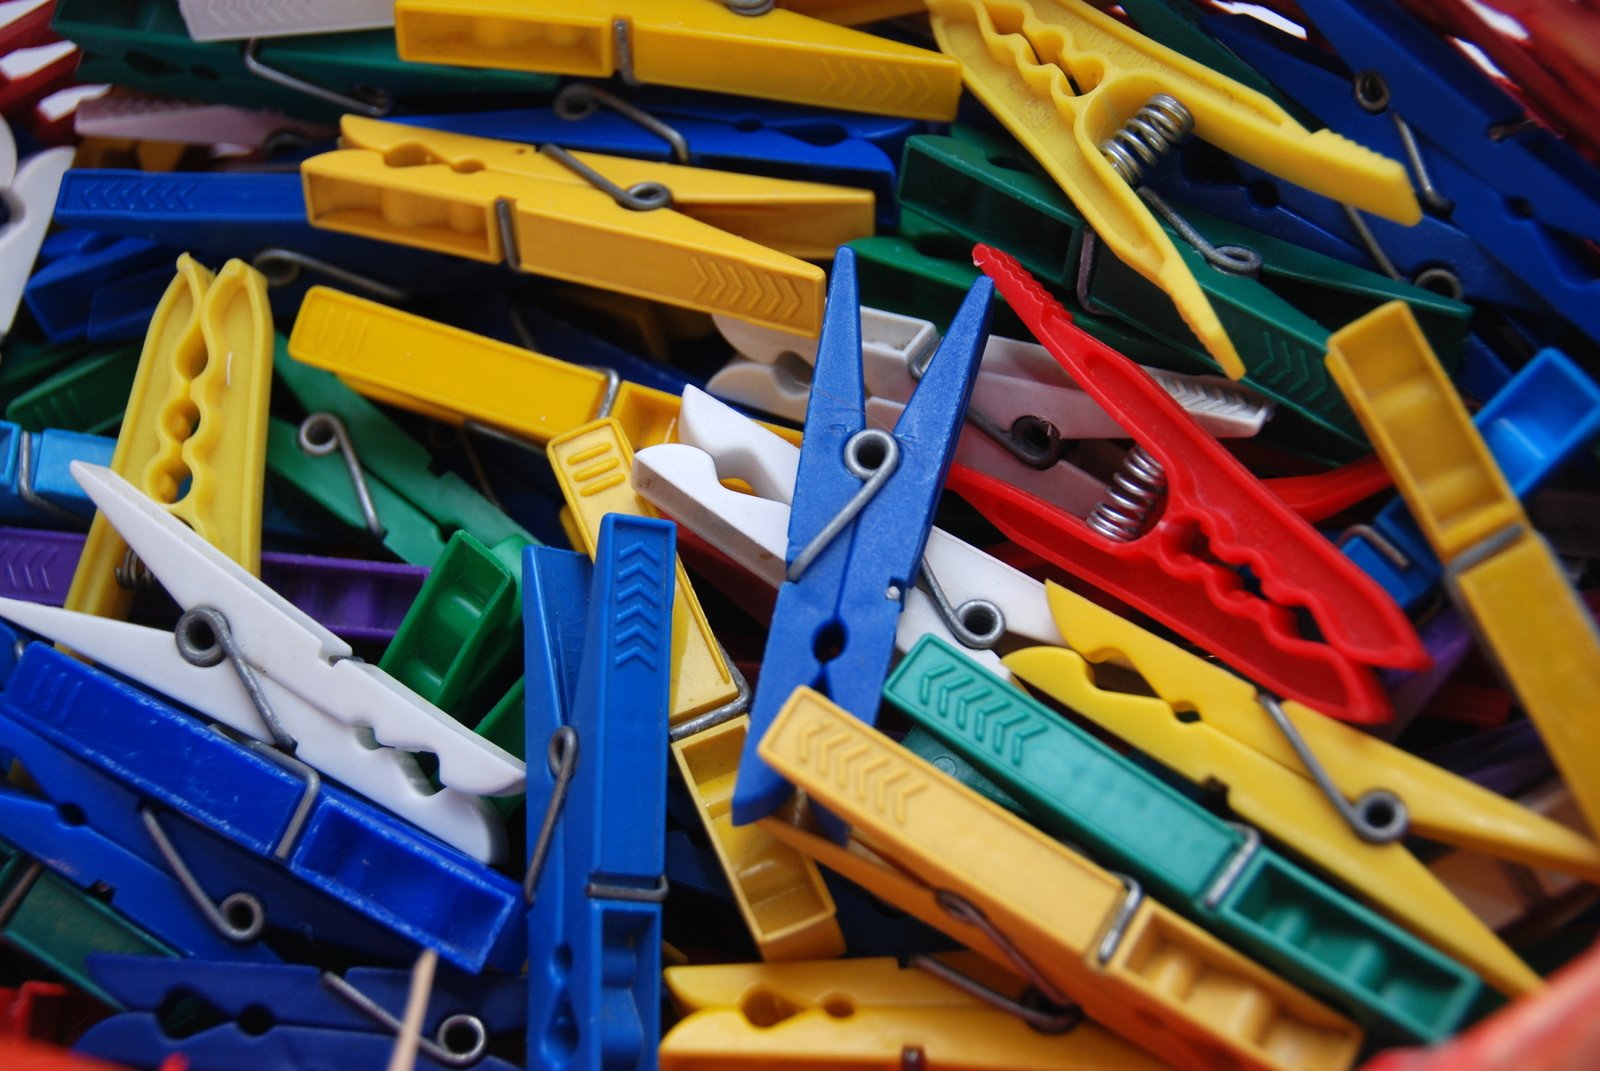 colorful scissors are arranged in rows, and on the ground